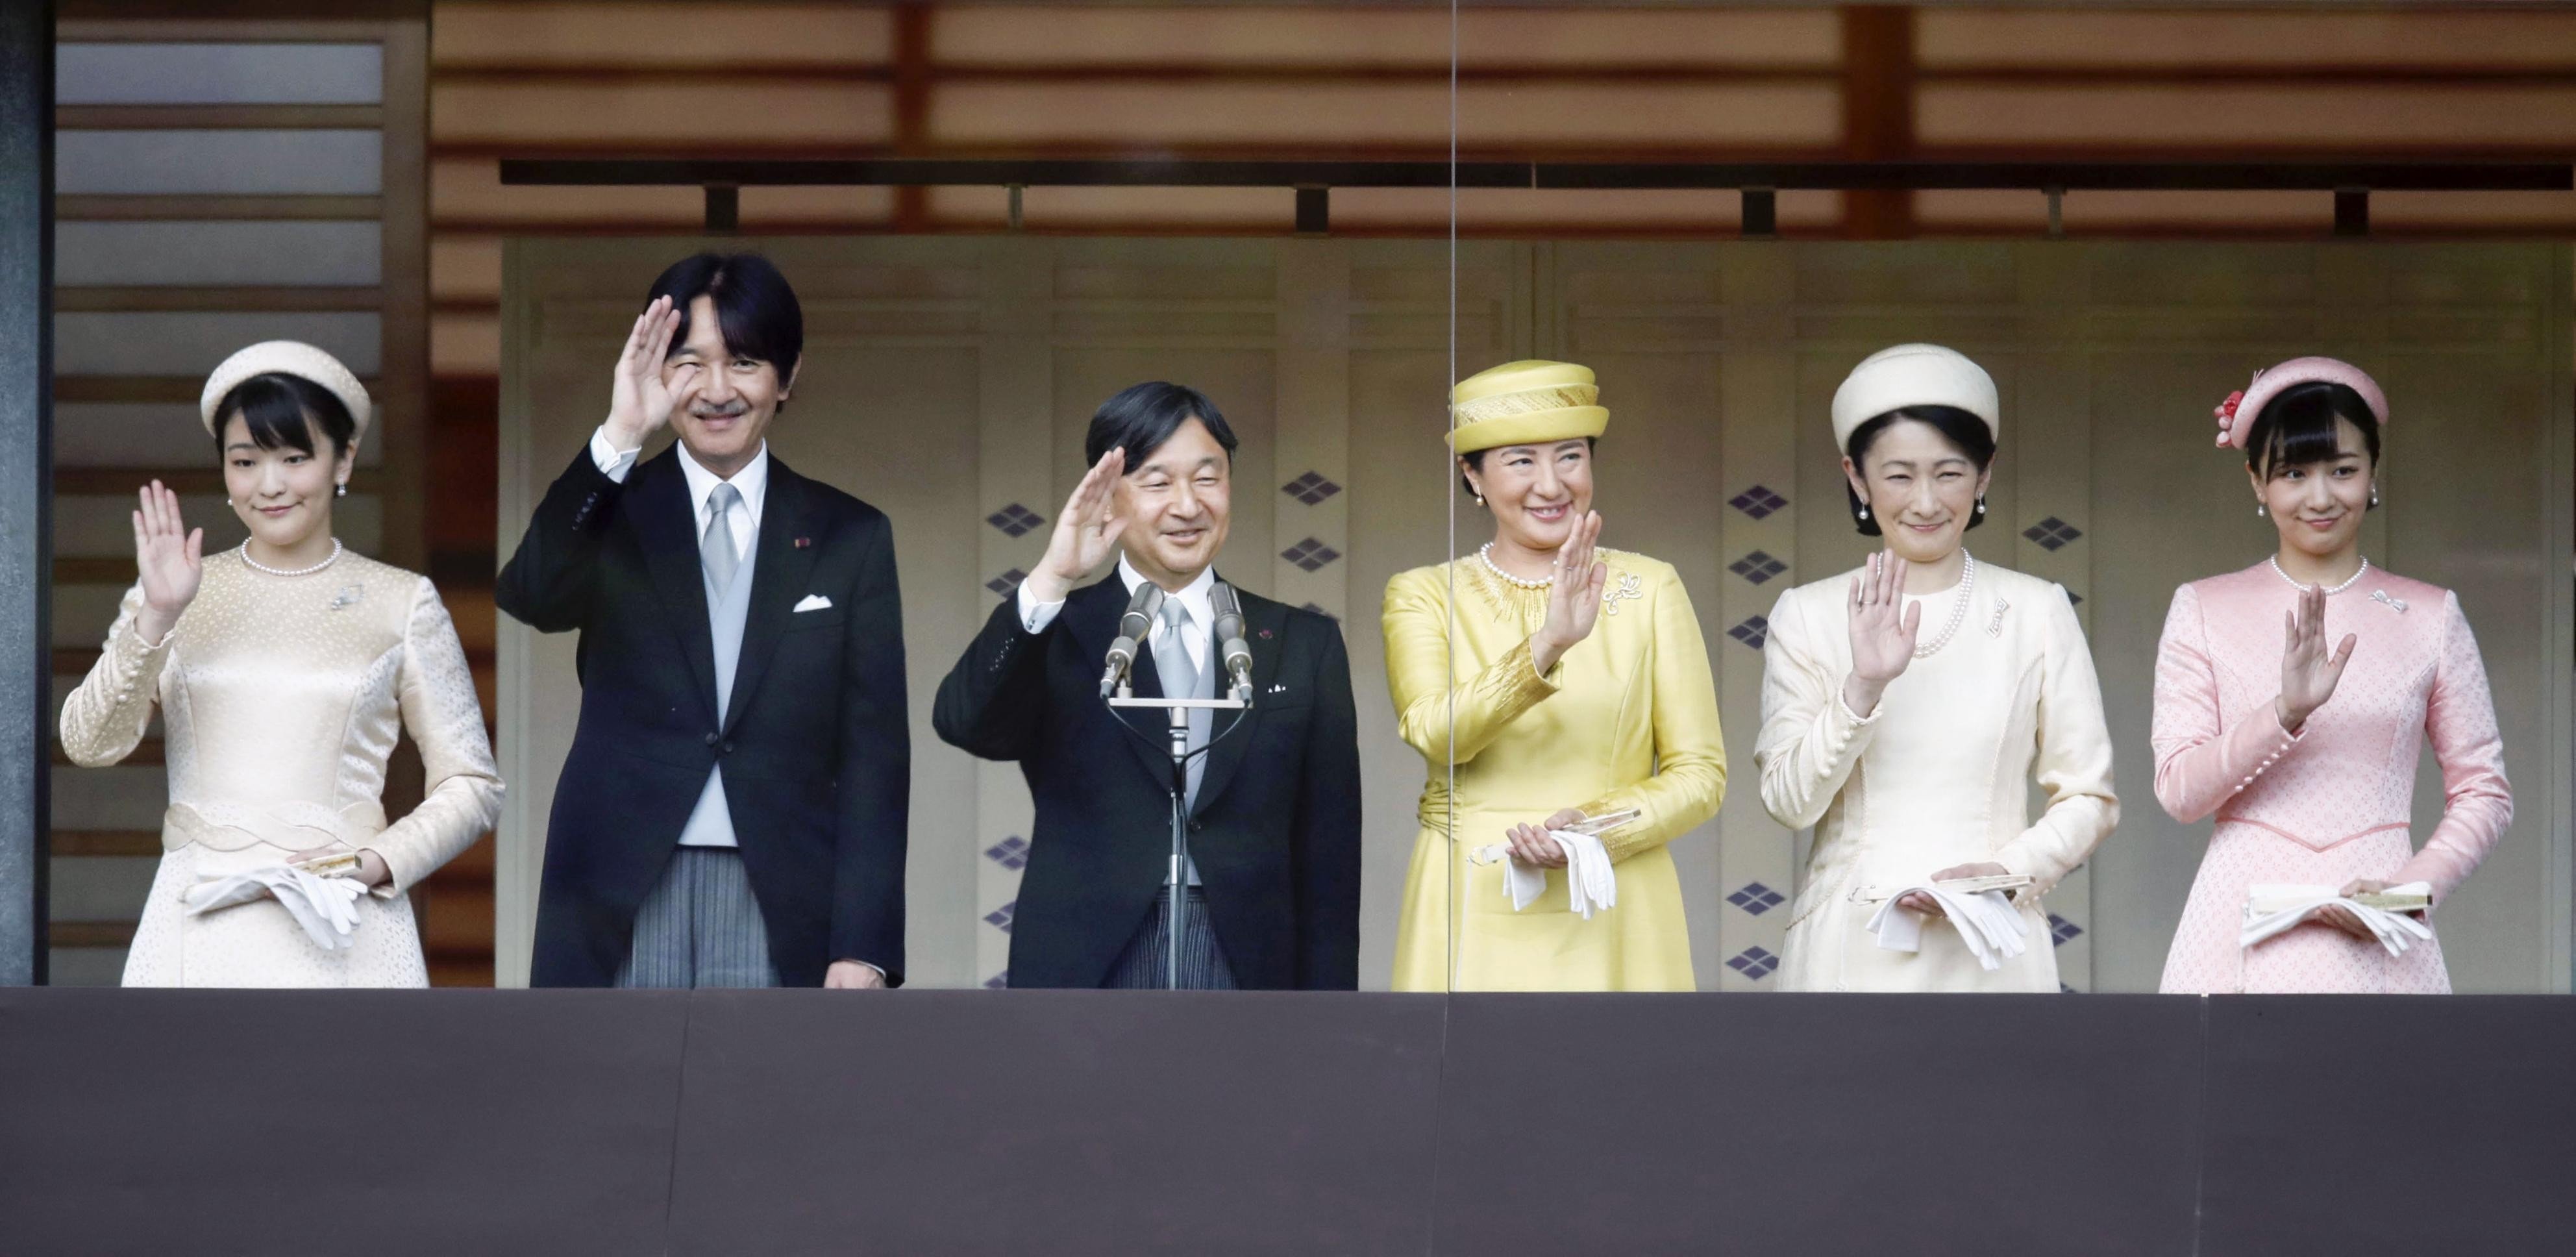 Japan’s Emperor Naruhito (second left), Empress Masako (second right), Crown Prince Fumihito (left) and Crown Princess Kiko (right) wave to well-wishers gathered at the Imperial Palace in Tokyo on May 4. It was the emperor's first public appearance since his enthronement on May 1. Photo: Kyodo